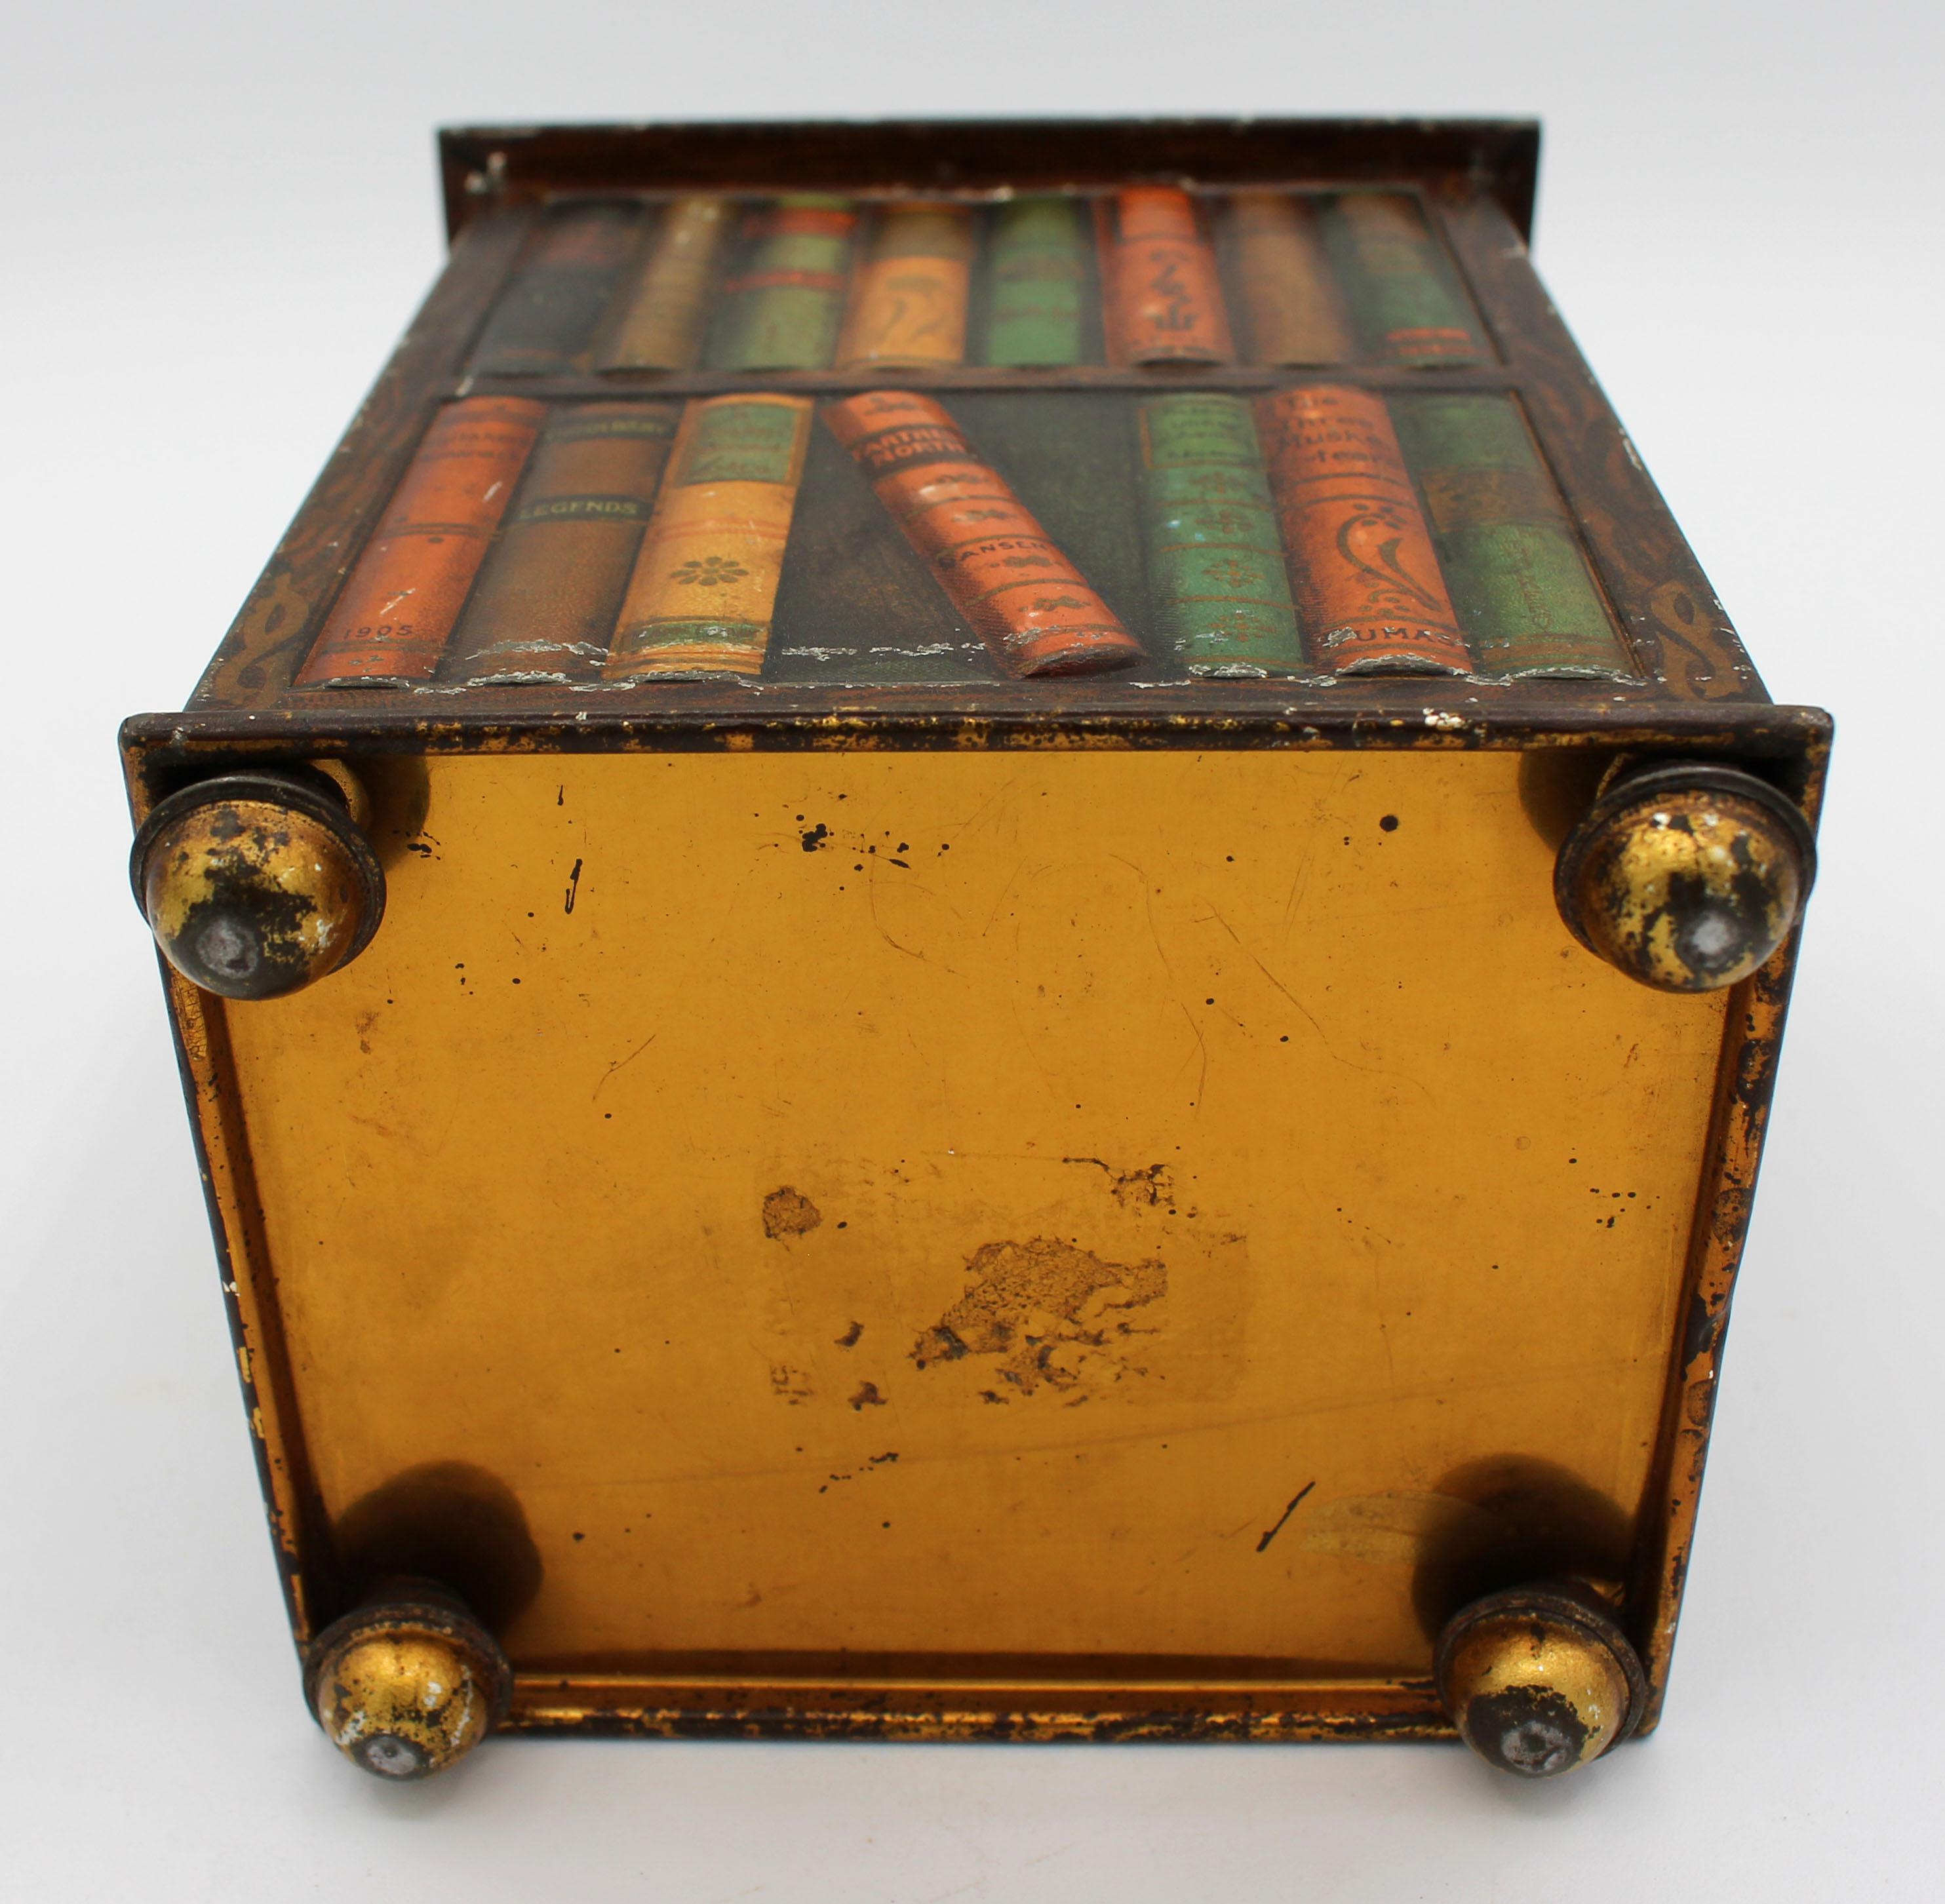 Faux Revolving Bookcase Biscuit Tin Box by Huntley & Palmers, 1905, English For Sale 1